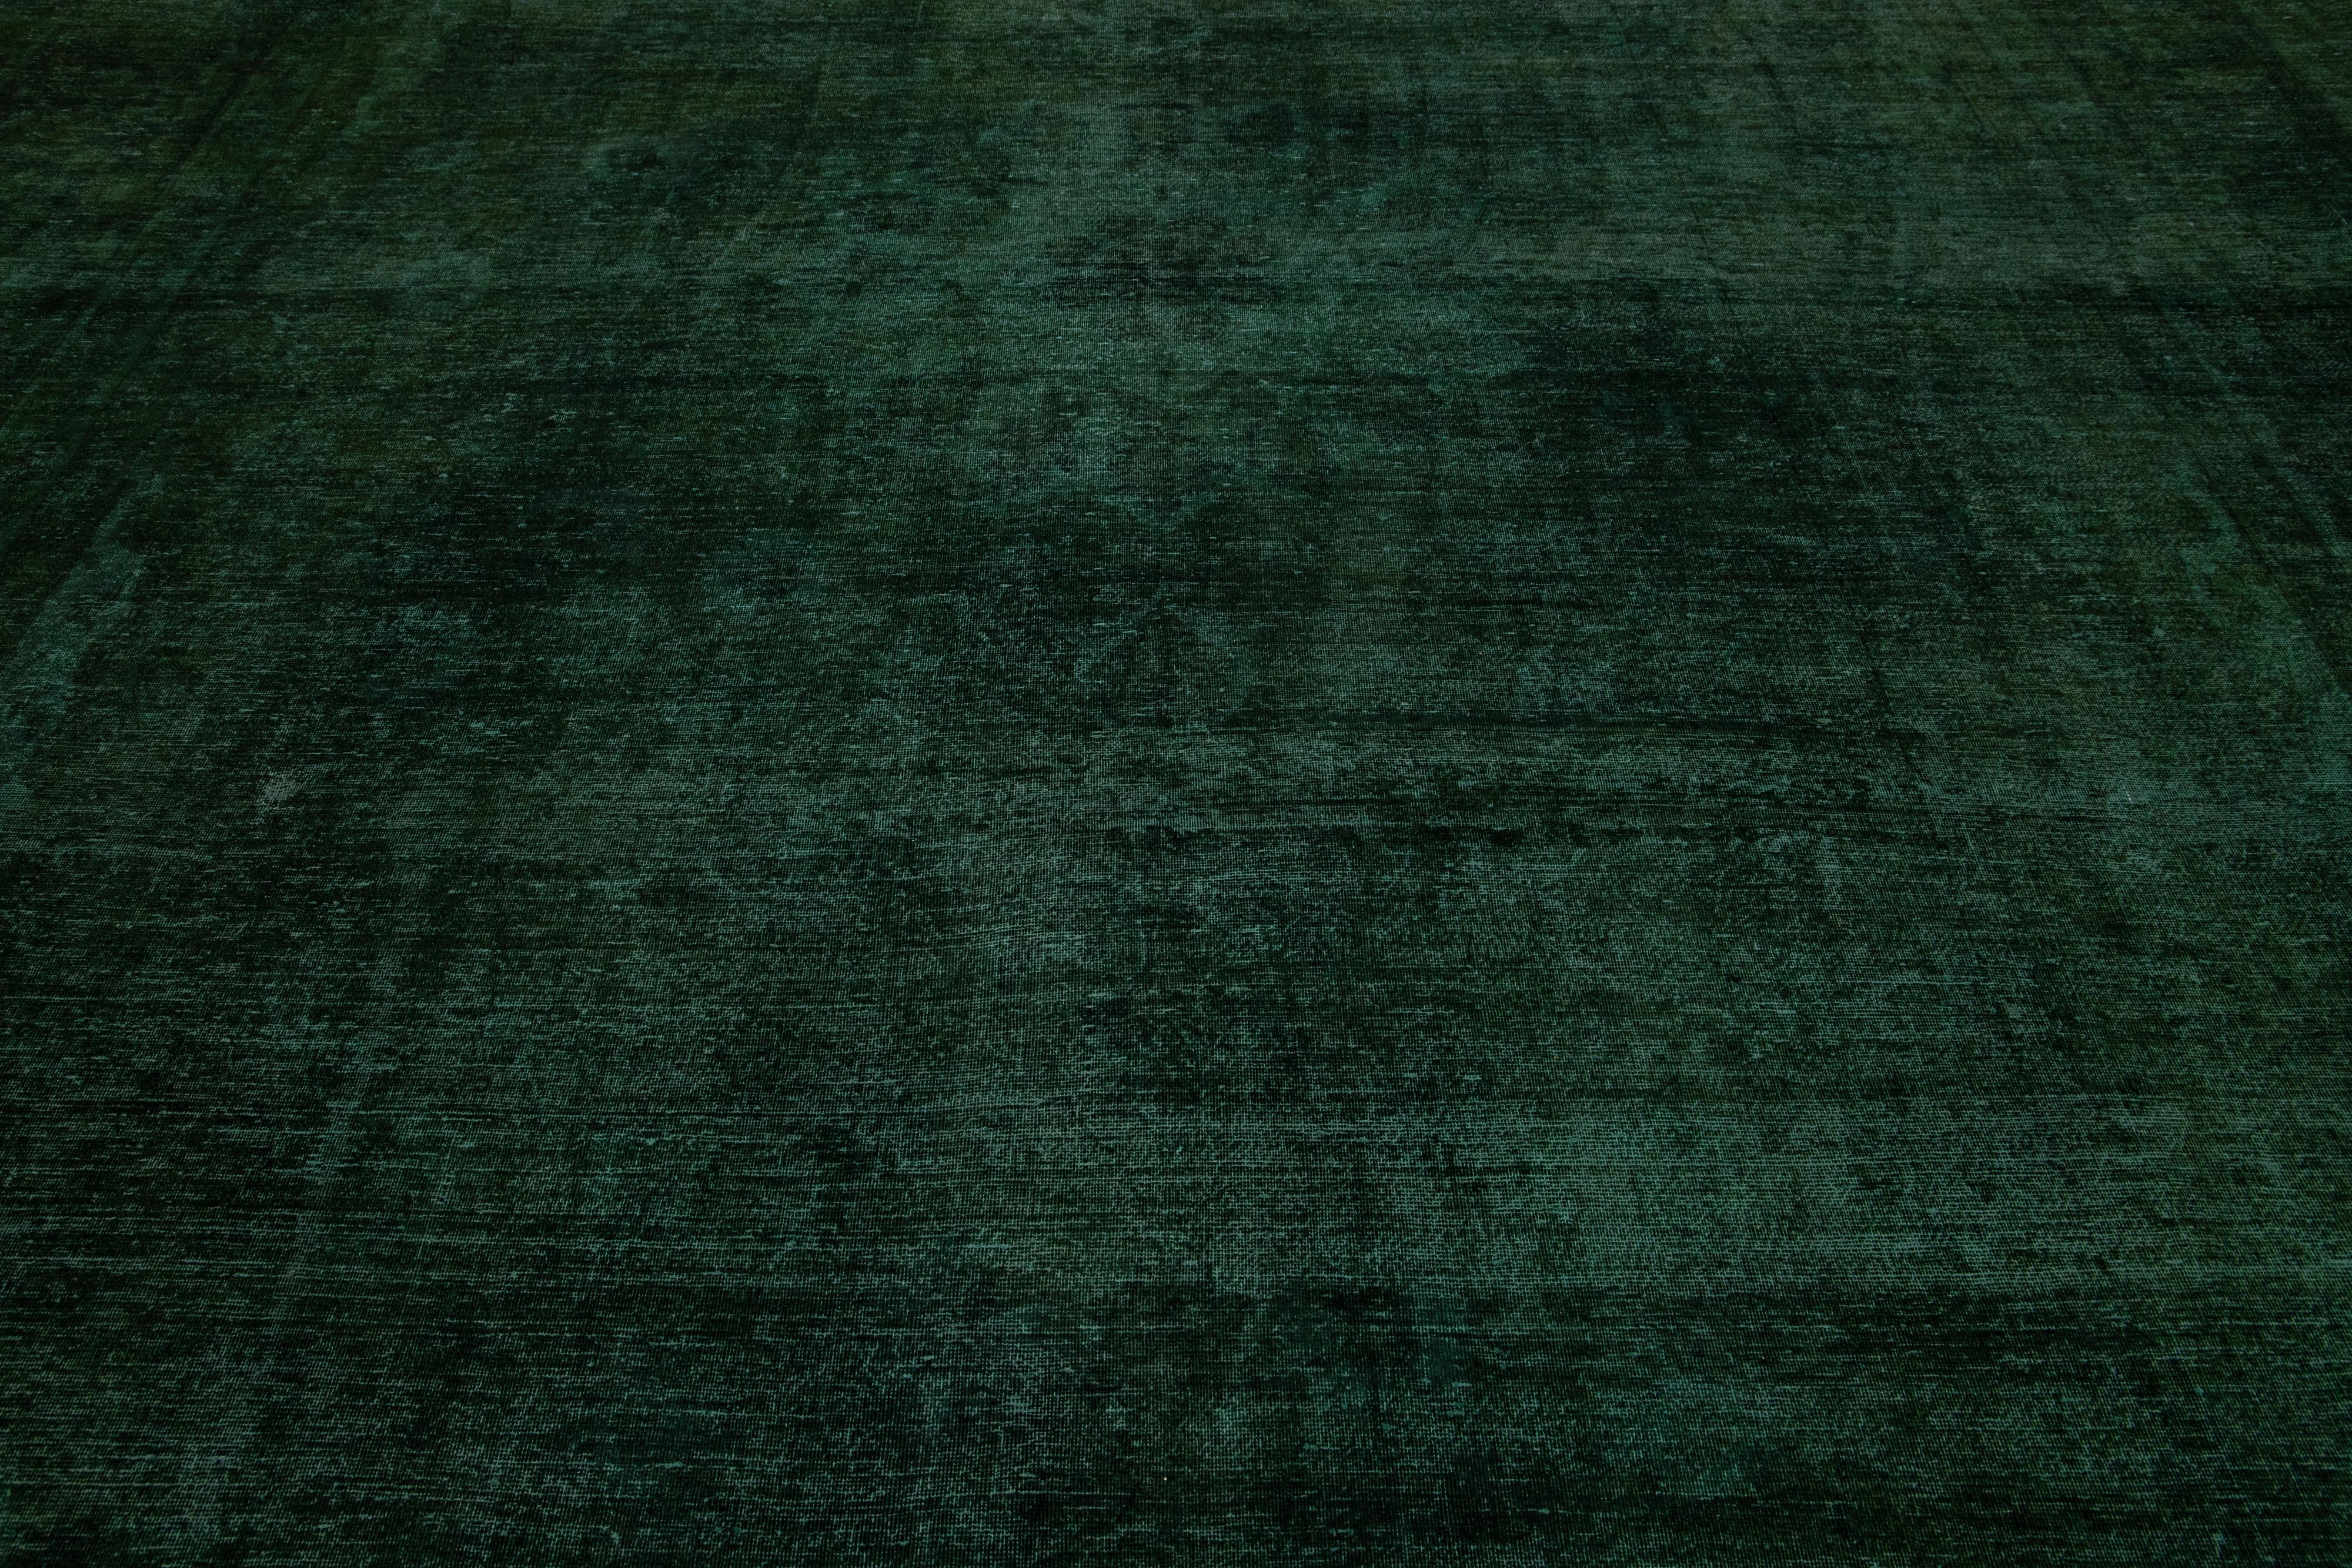  Handmade 1930s Overdyed Persian Designed Wool Rug Oversize In Green For Sale 1